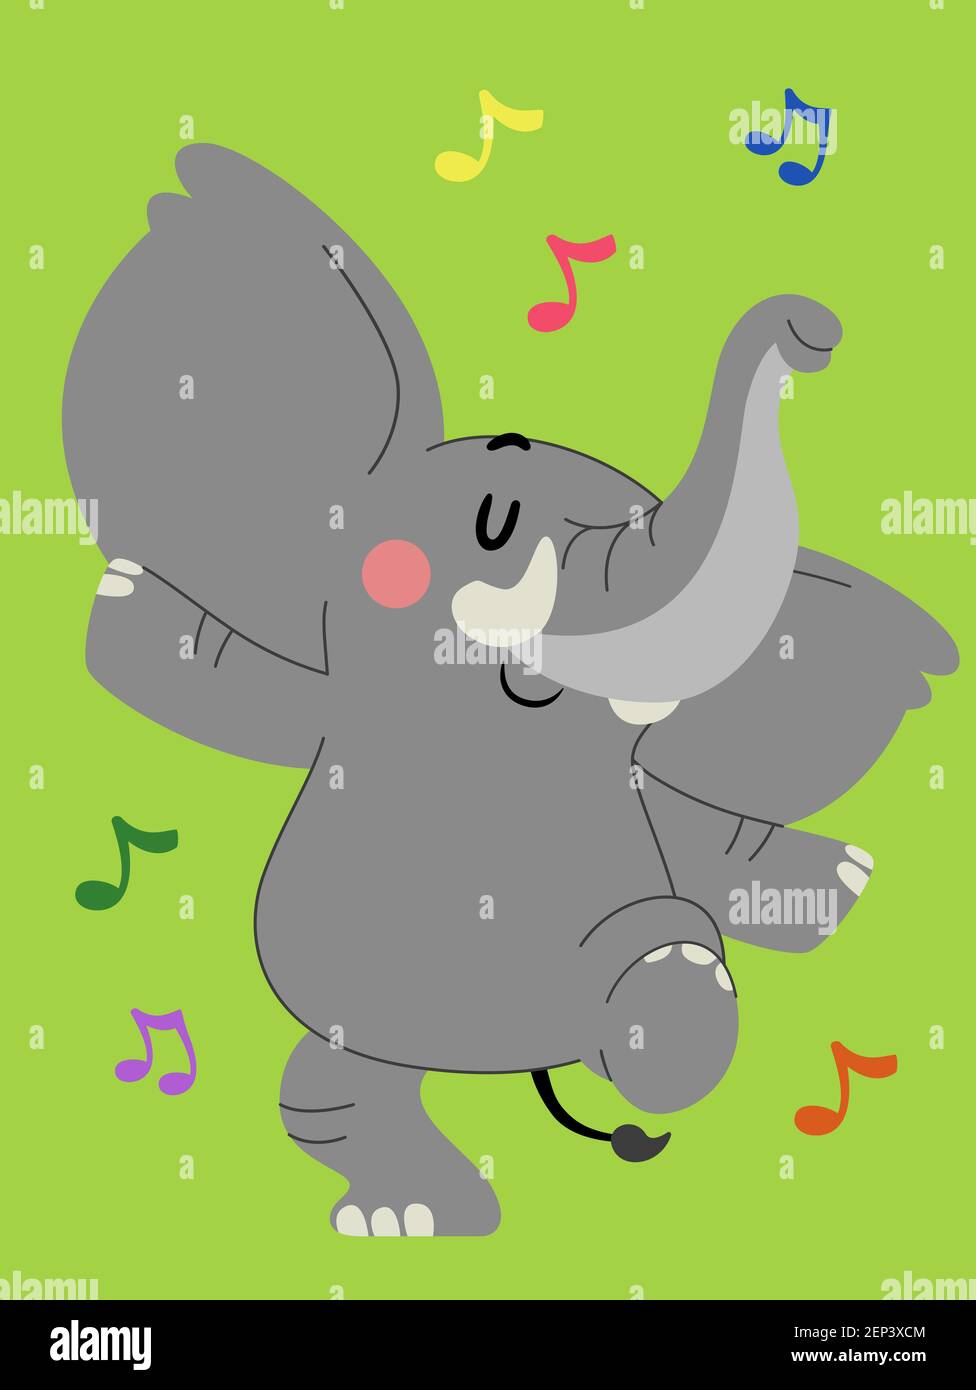 Illustration of an Elephant Mascot Dancing to Music Stock Photo